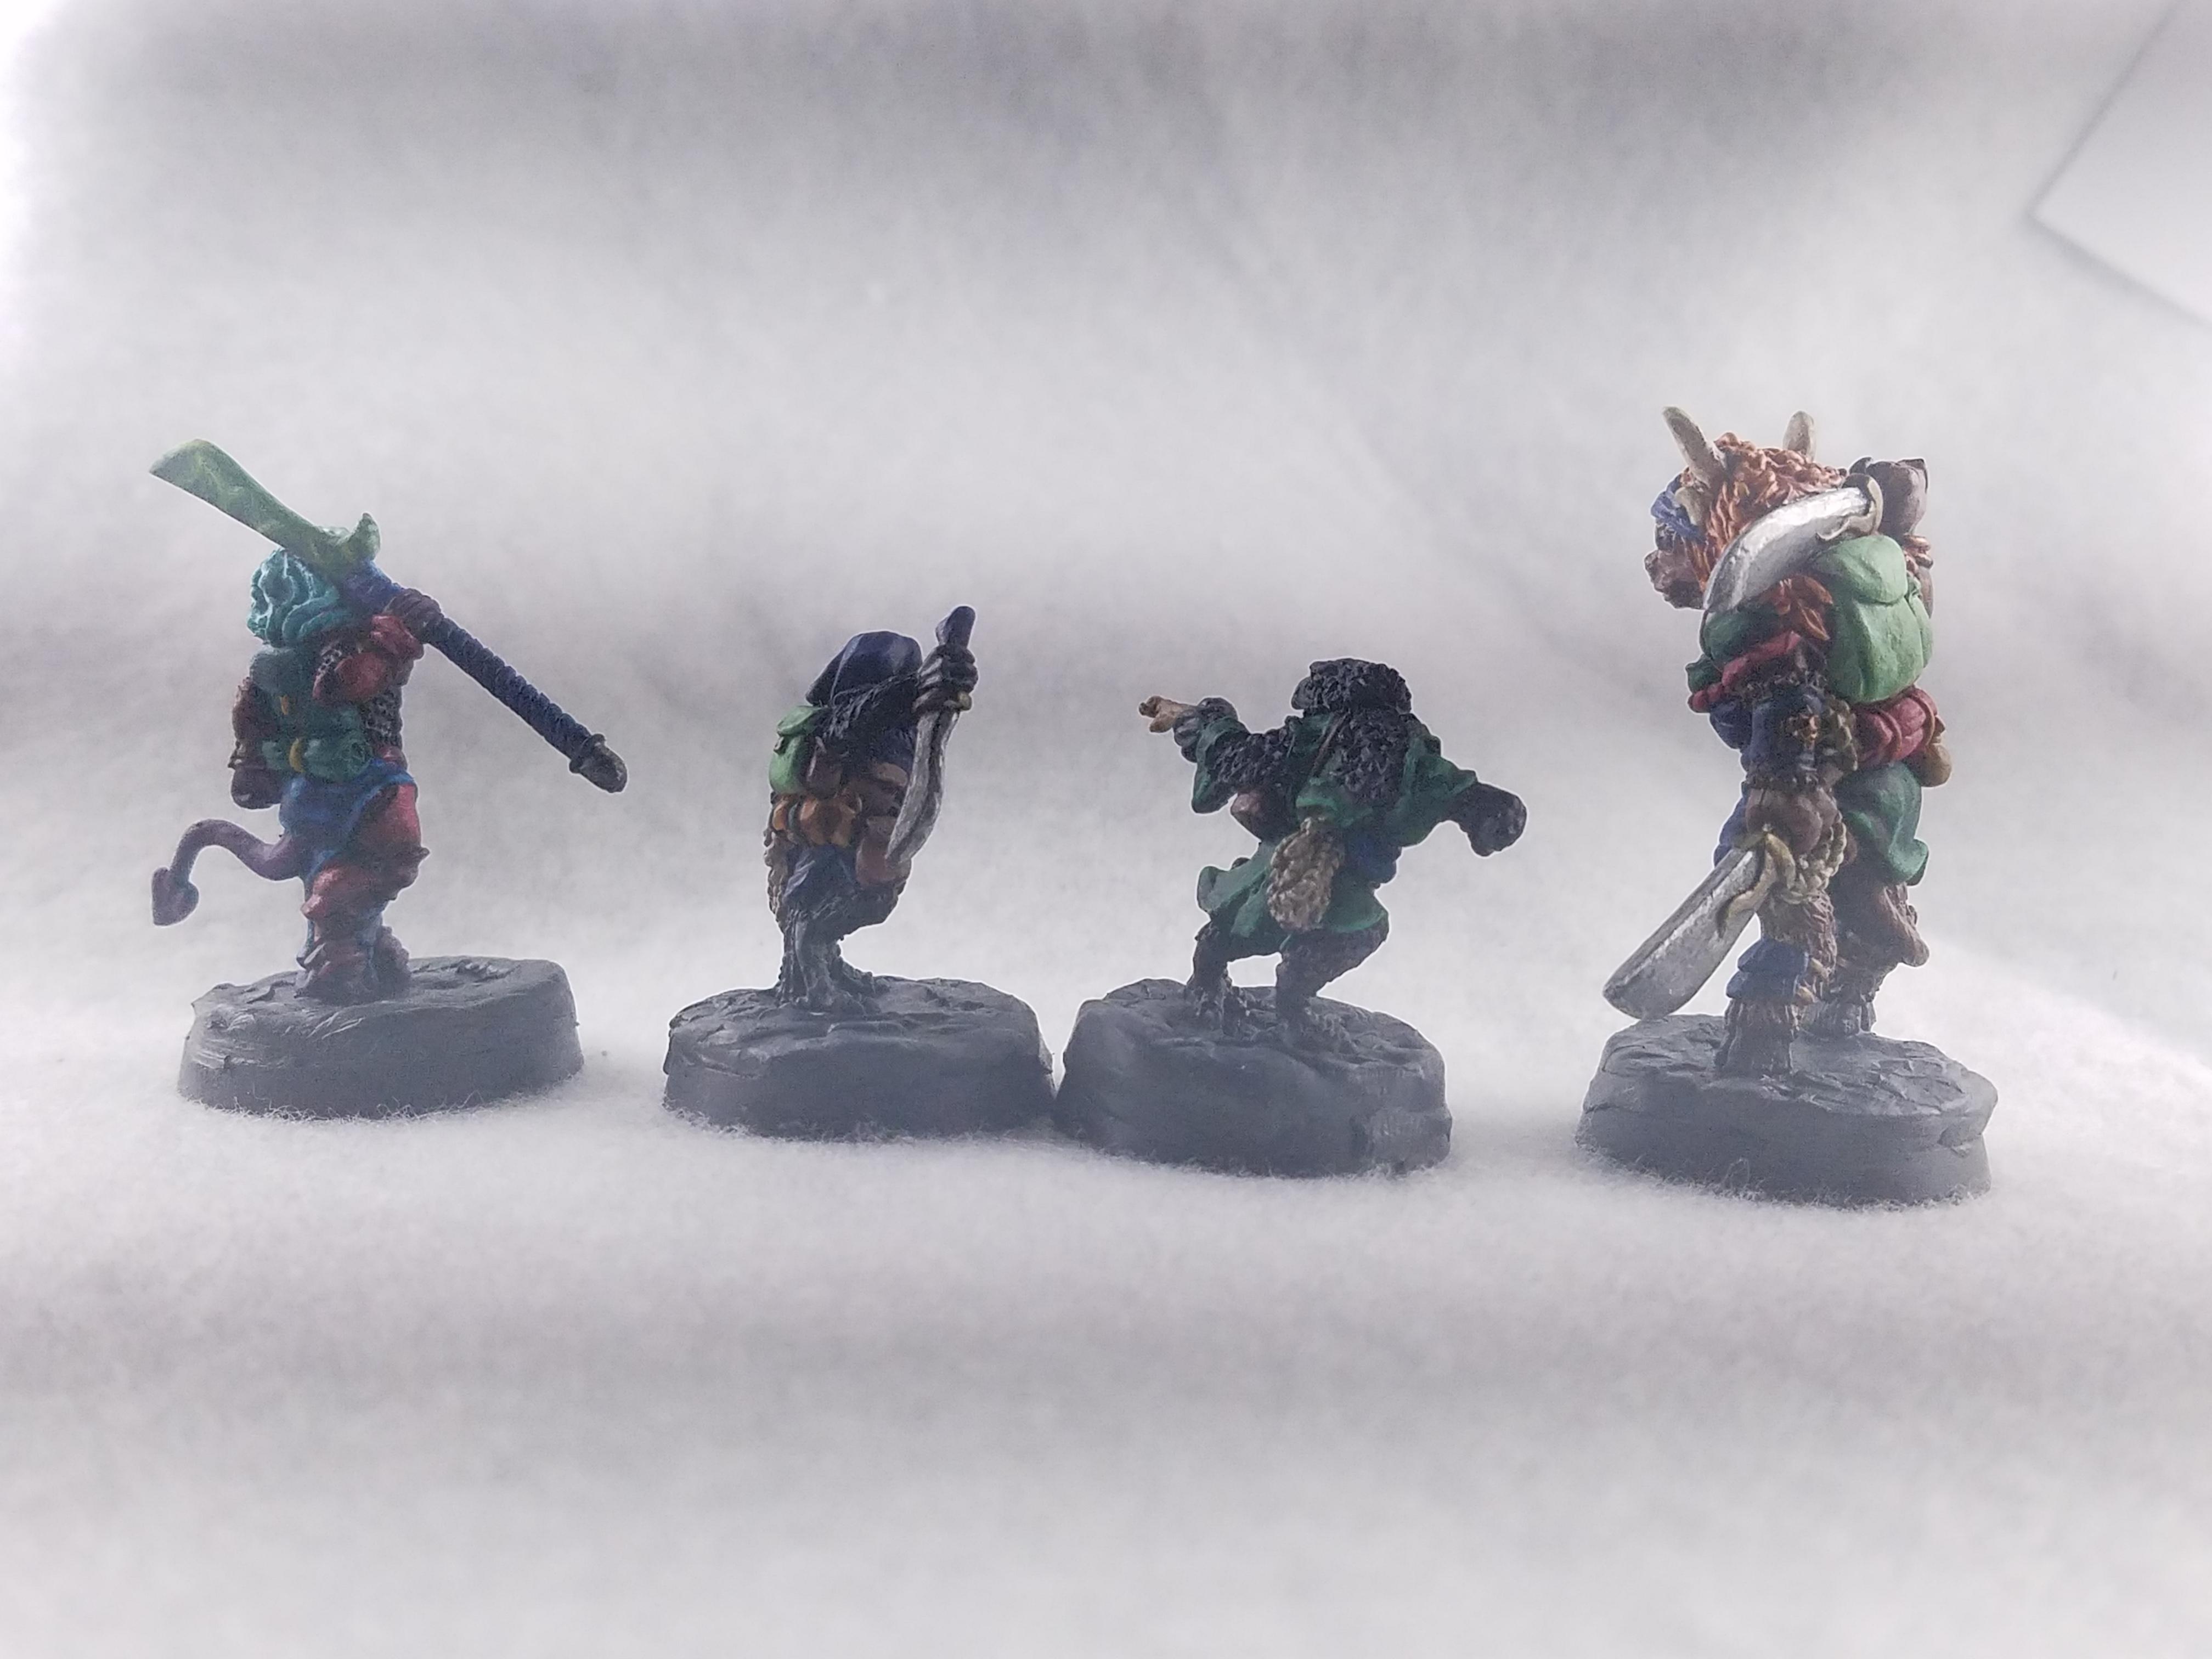 Adventurers, Dakka Painting Challenge 2018, Dungeons And Dragons, Fog, My Thats Some Washed Out Pictures You Have, Oathsworn